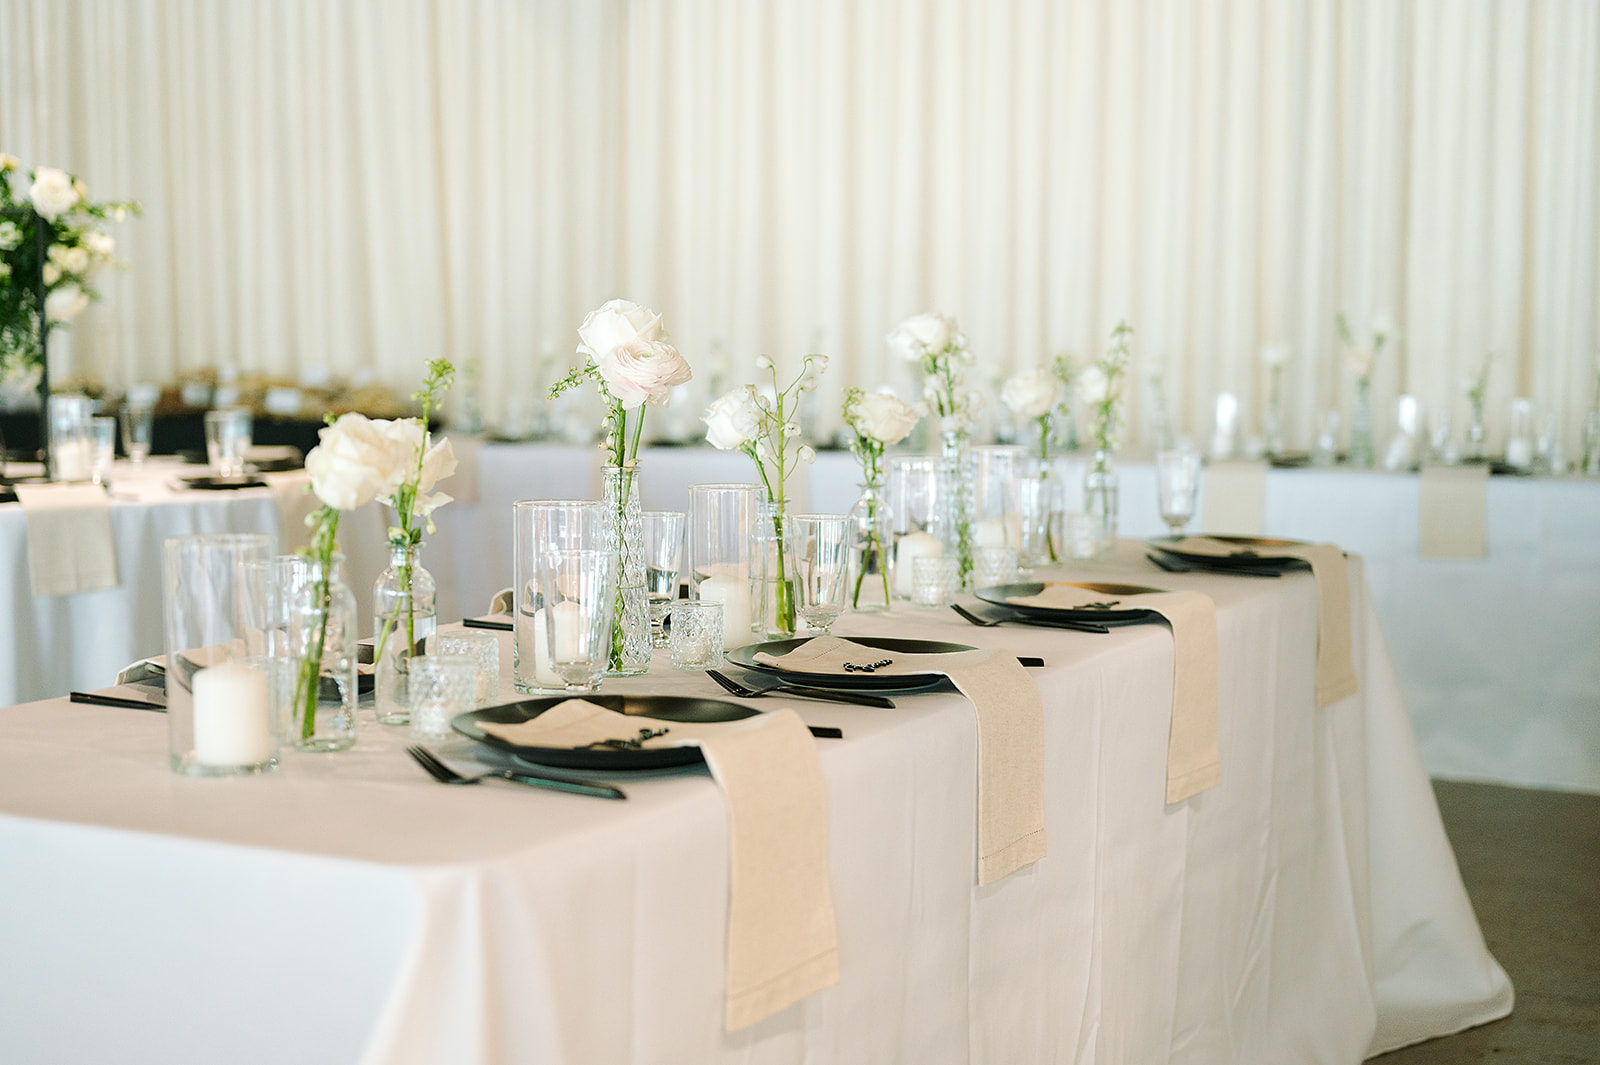 Details of a table setting with white linens and black dishes at a wedding reception